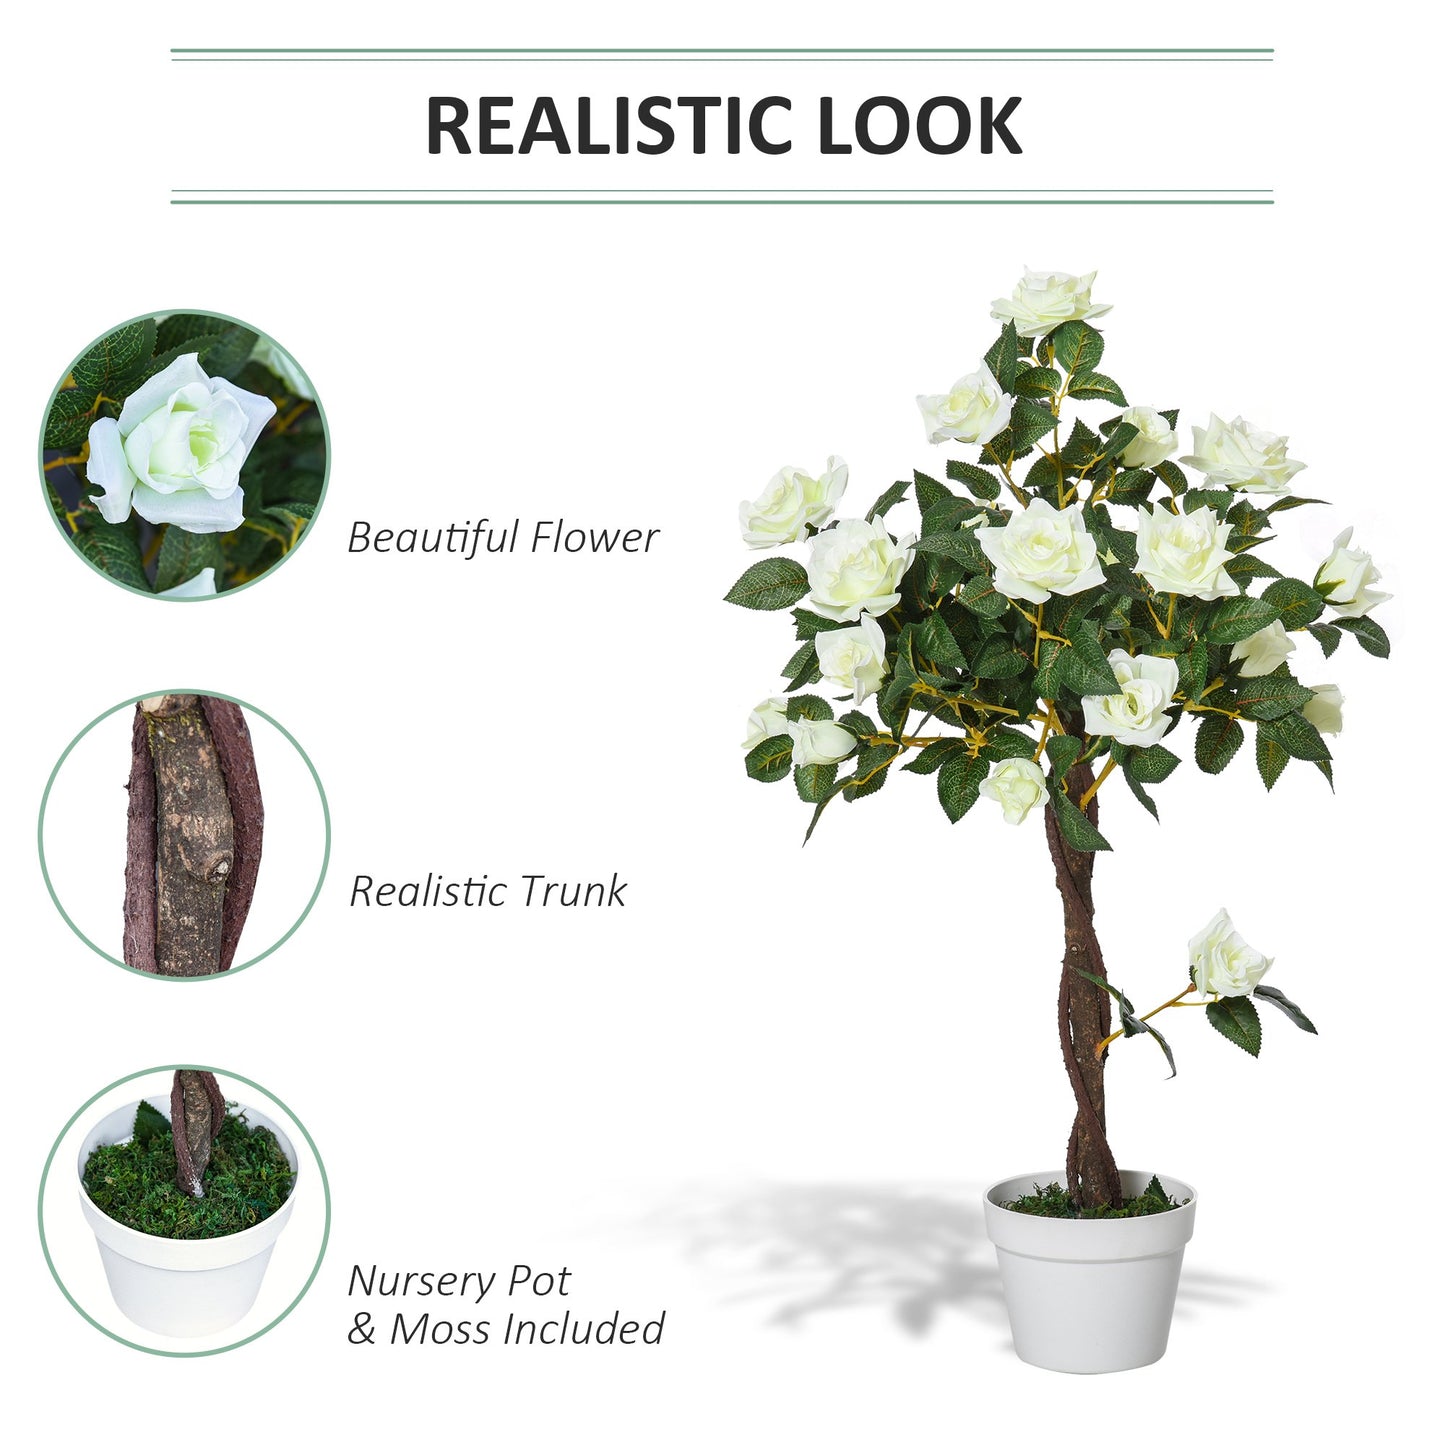 Outsunny Artificial Camellia Plant Realistic Fake Tree Potted Home Office 90cm White